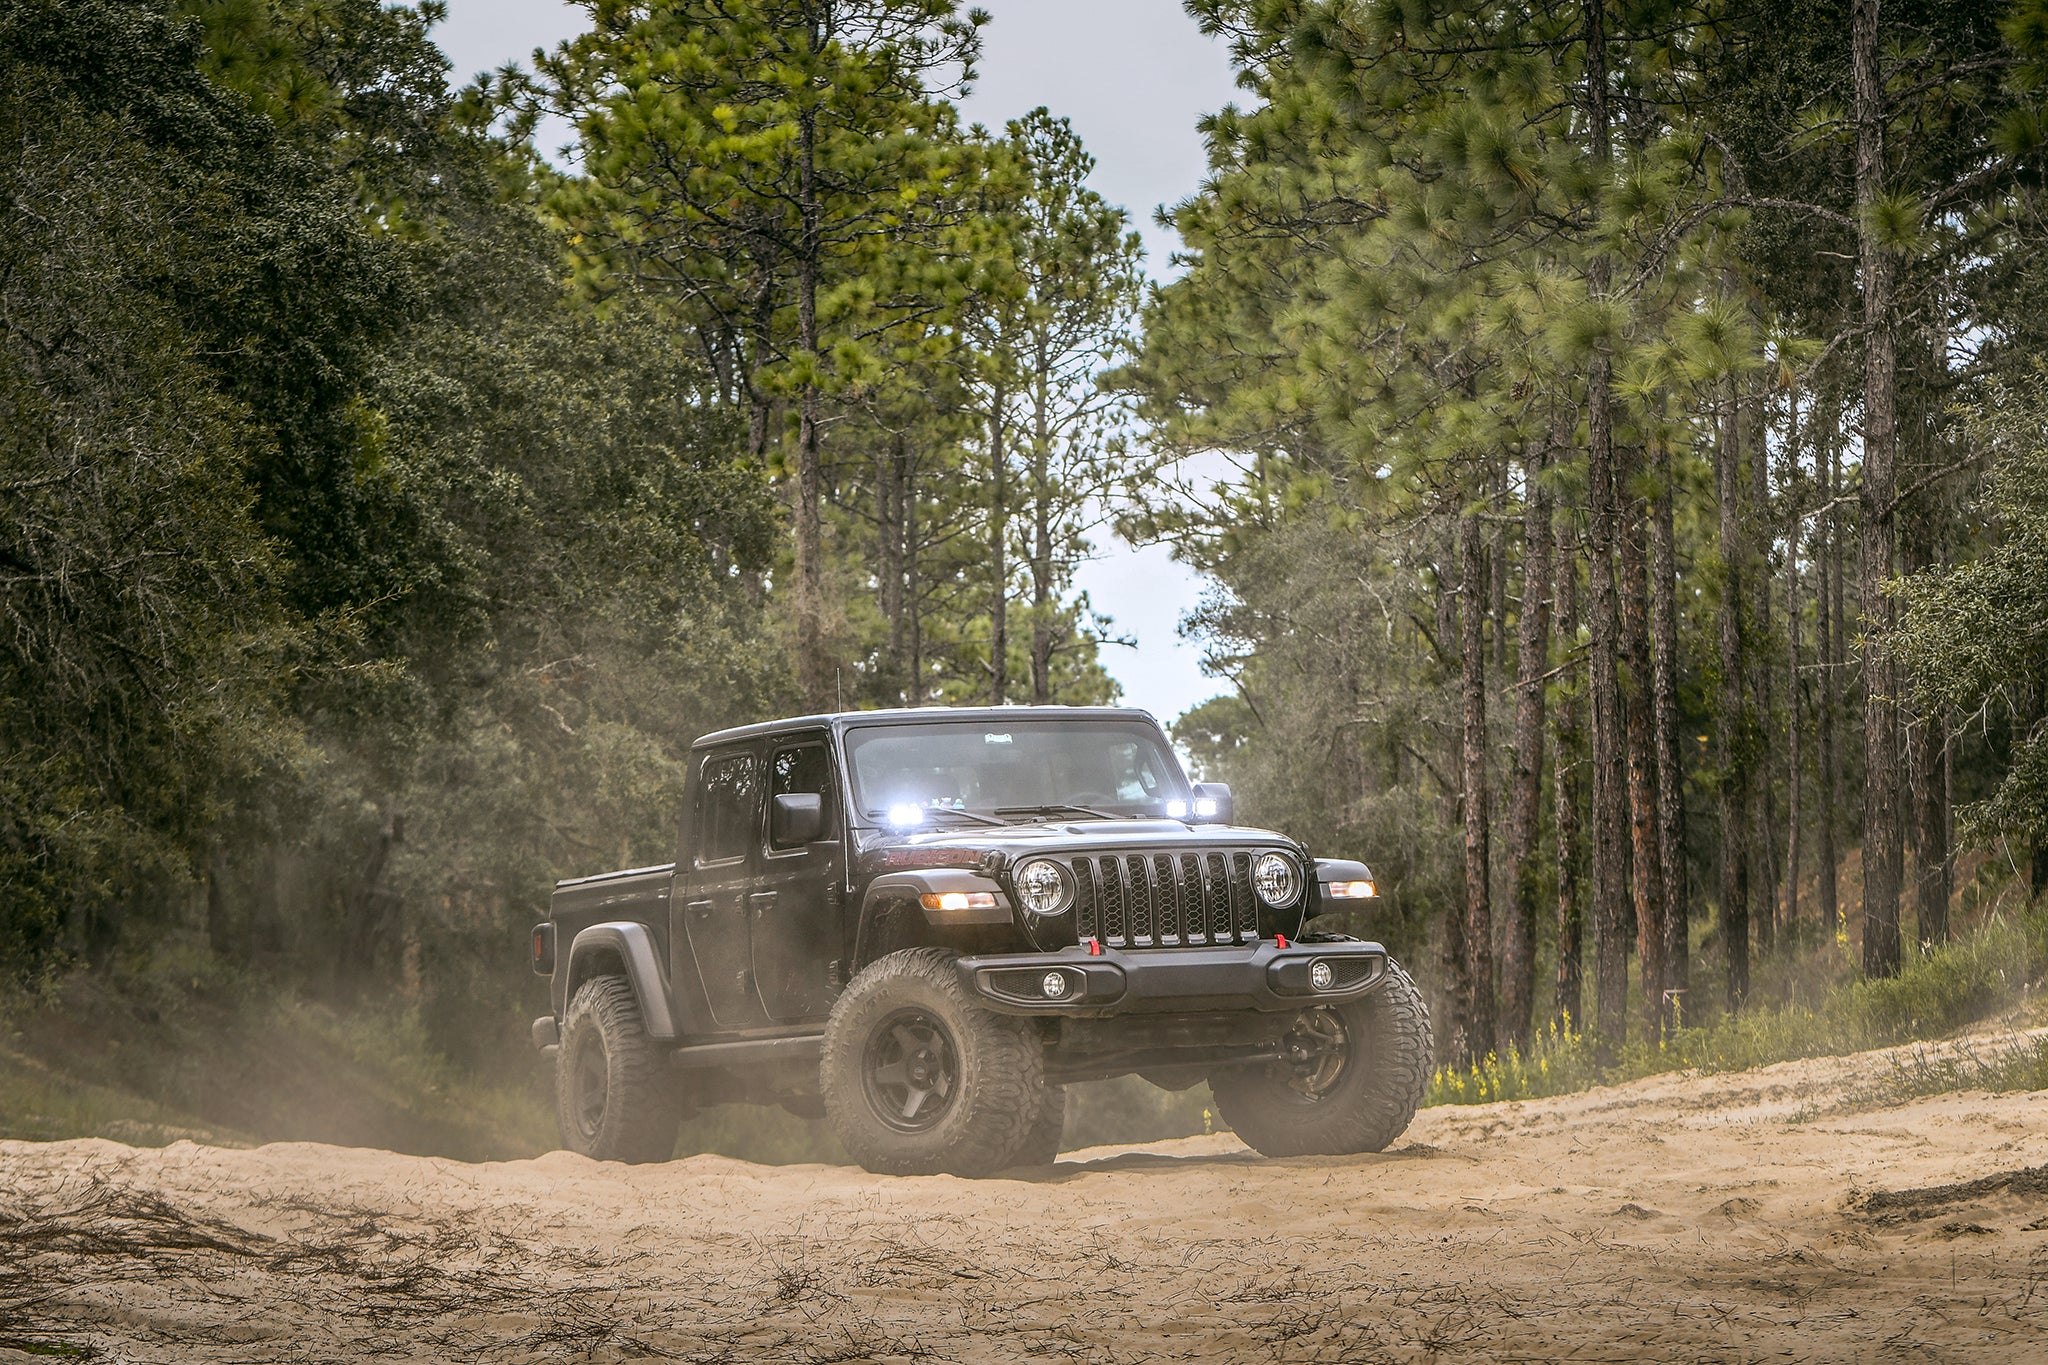 overland sector wheels jeep gladiator rubicon on 17x9 satin black atlas wheels on dirt trail in woods